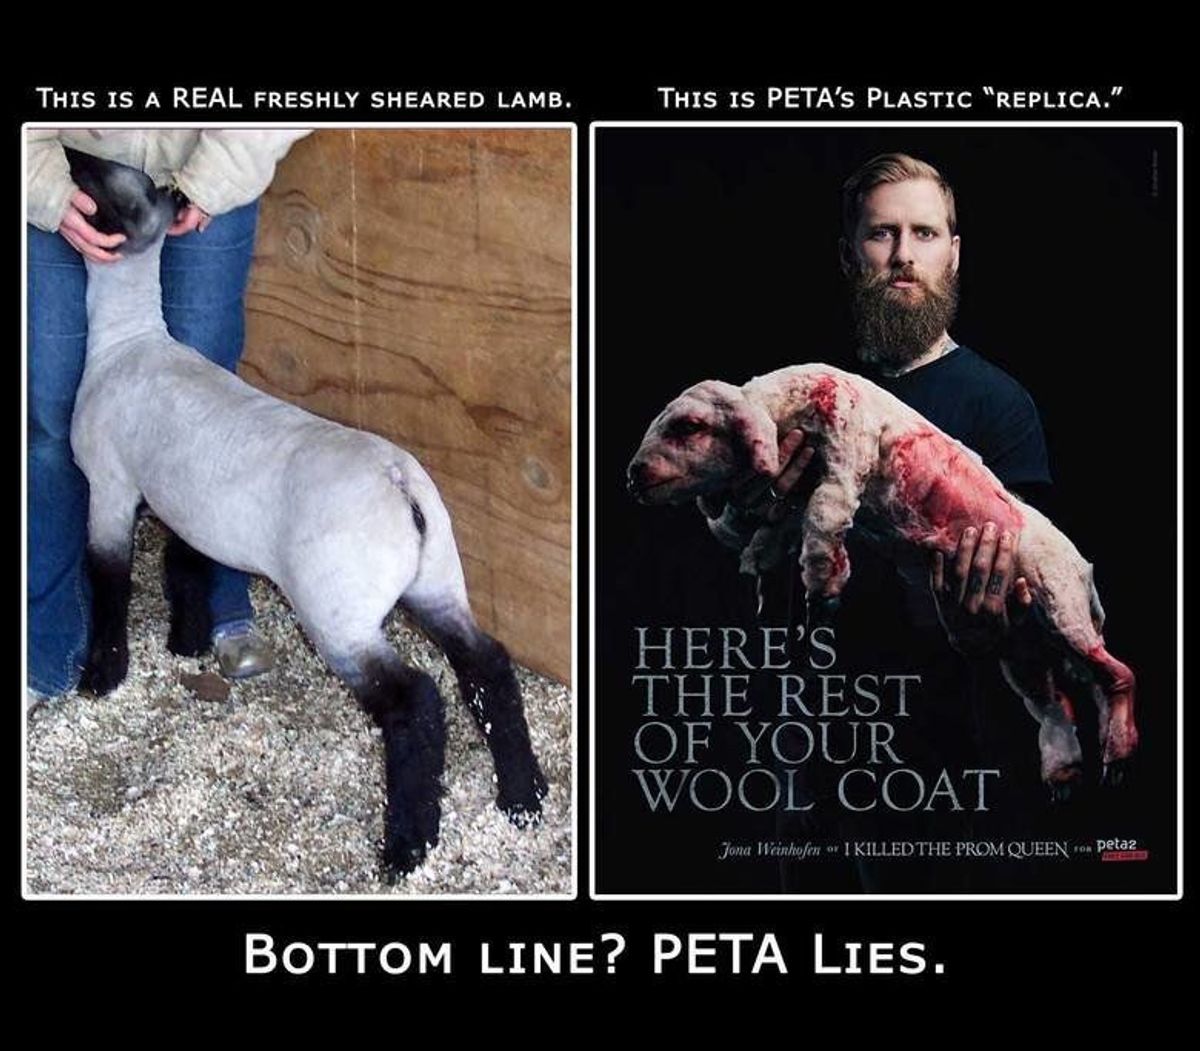 4 Things From PETA You Should Never Believe